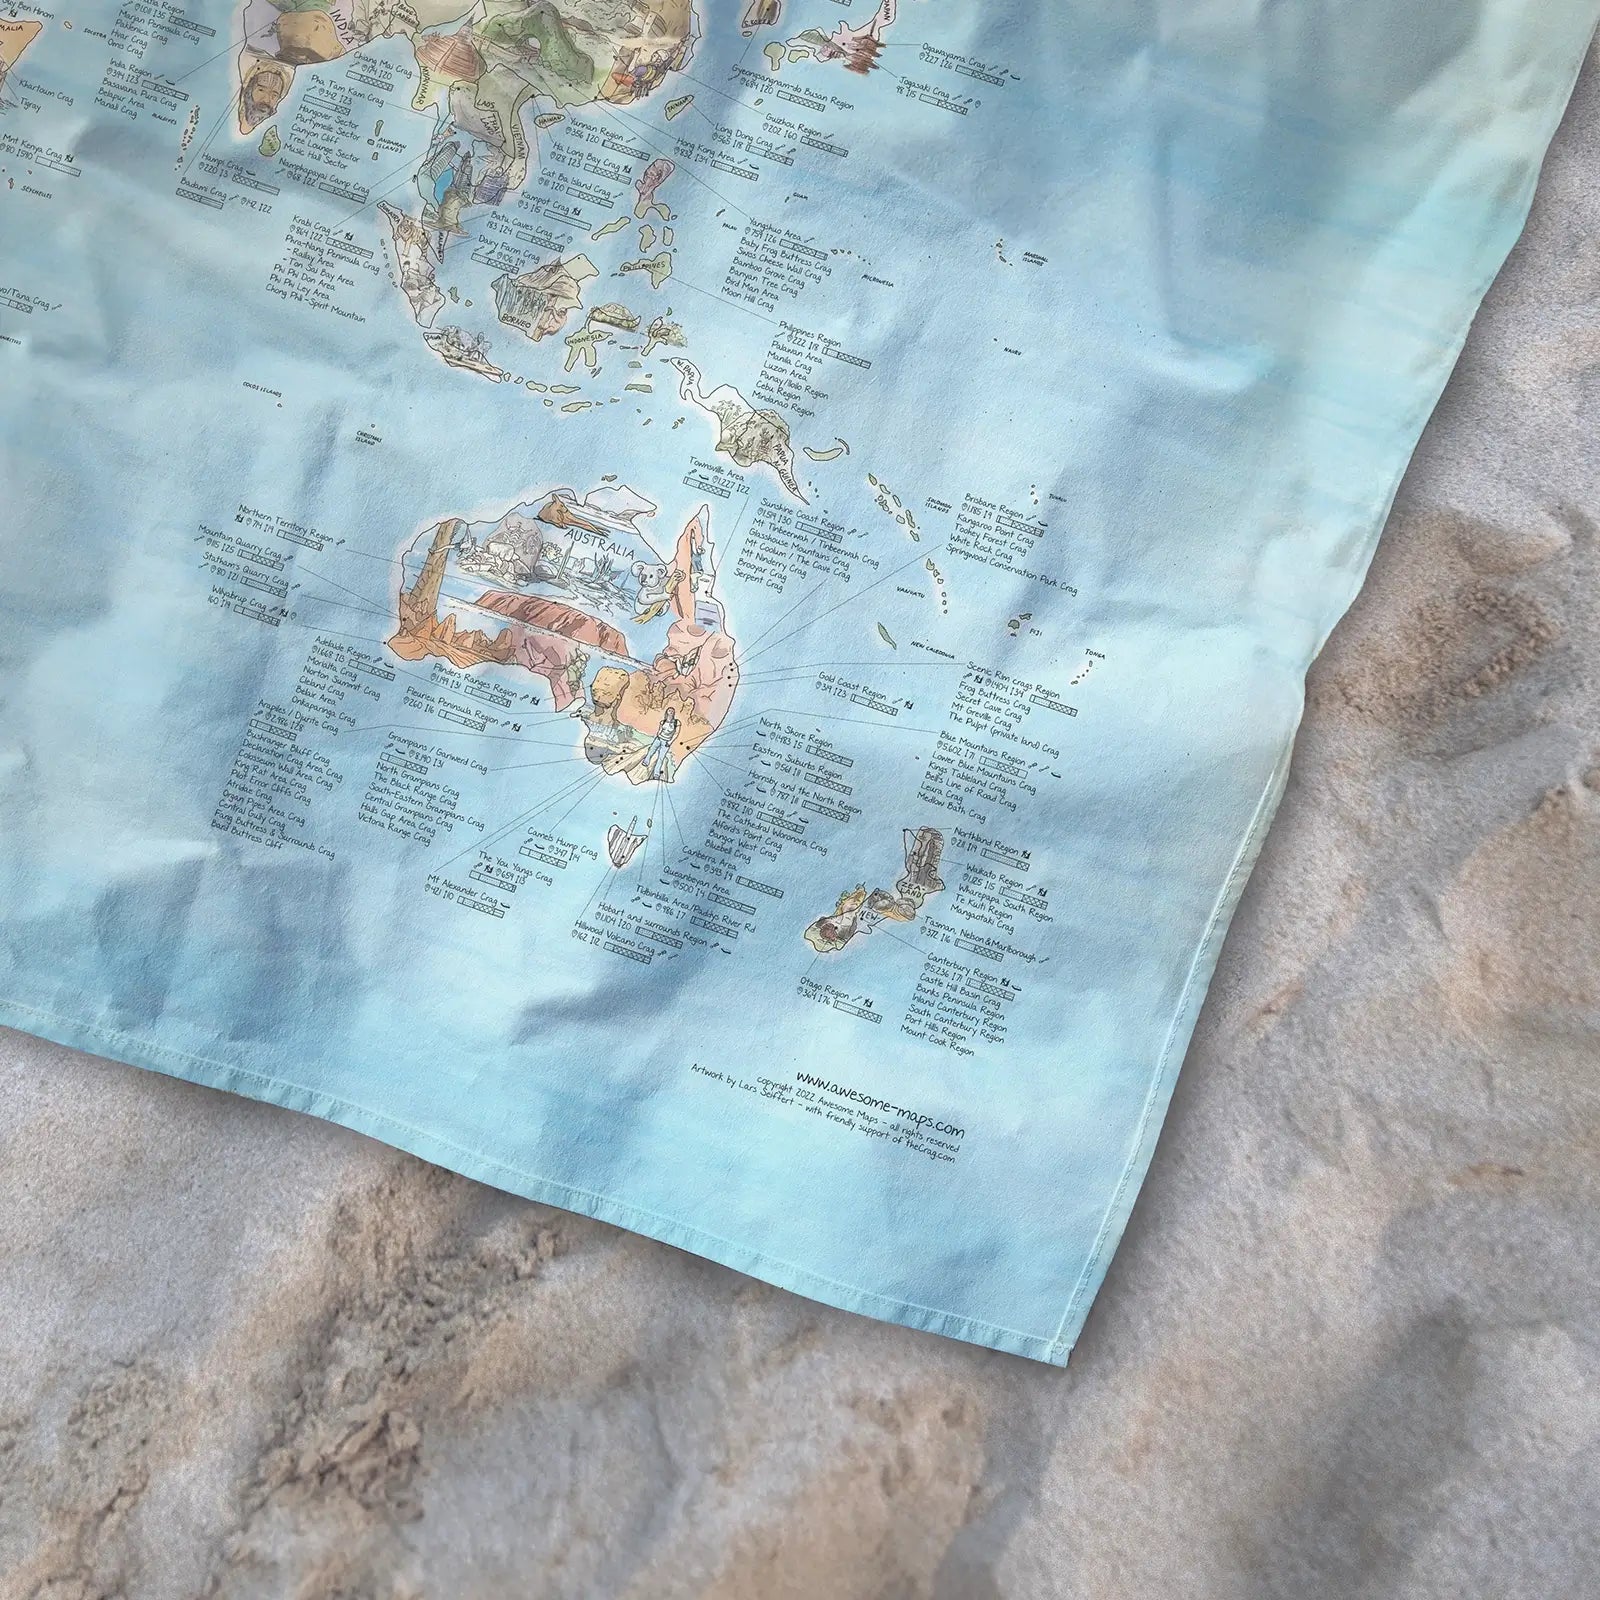 Bottom right corner of the Climbing Map towel of the world lying on the sand